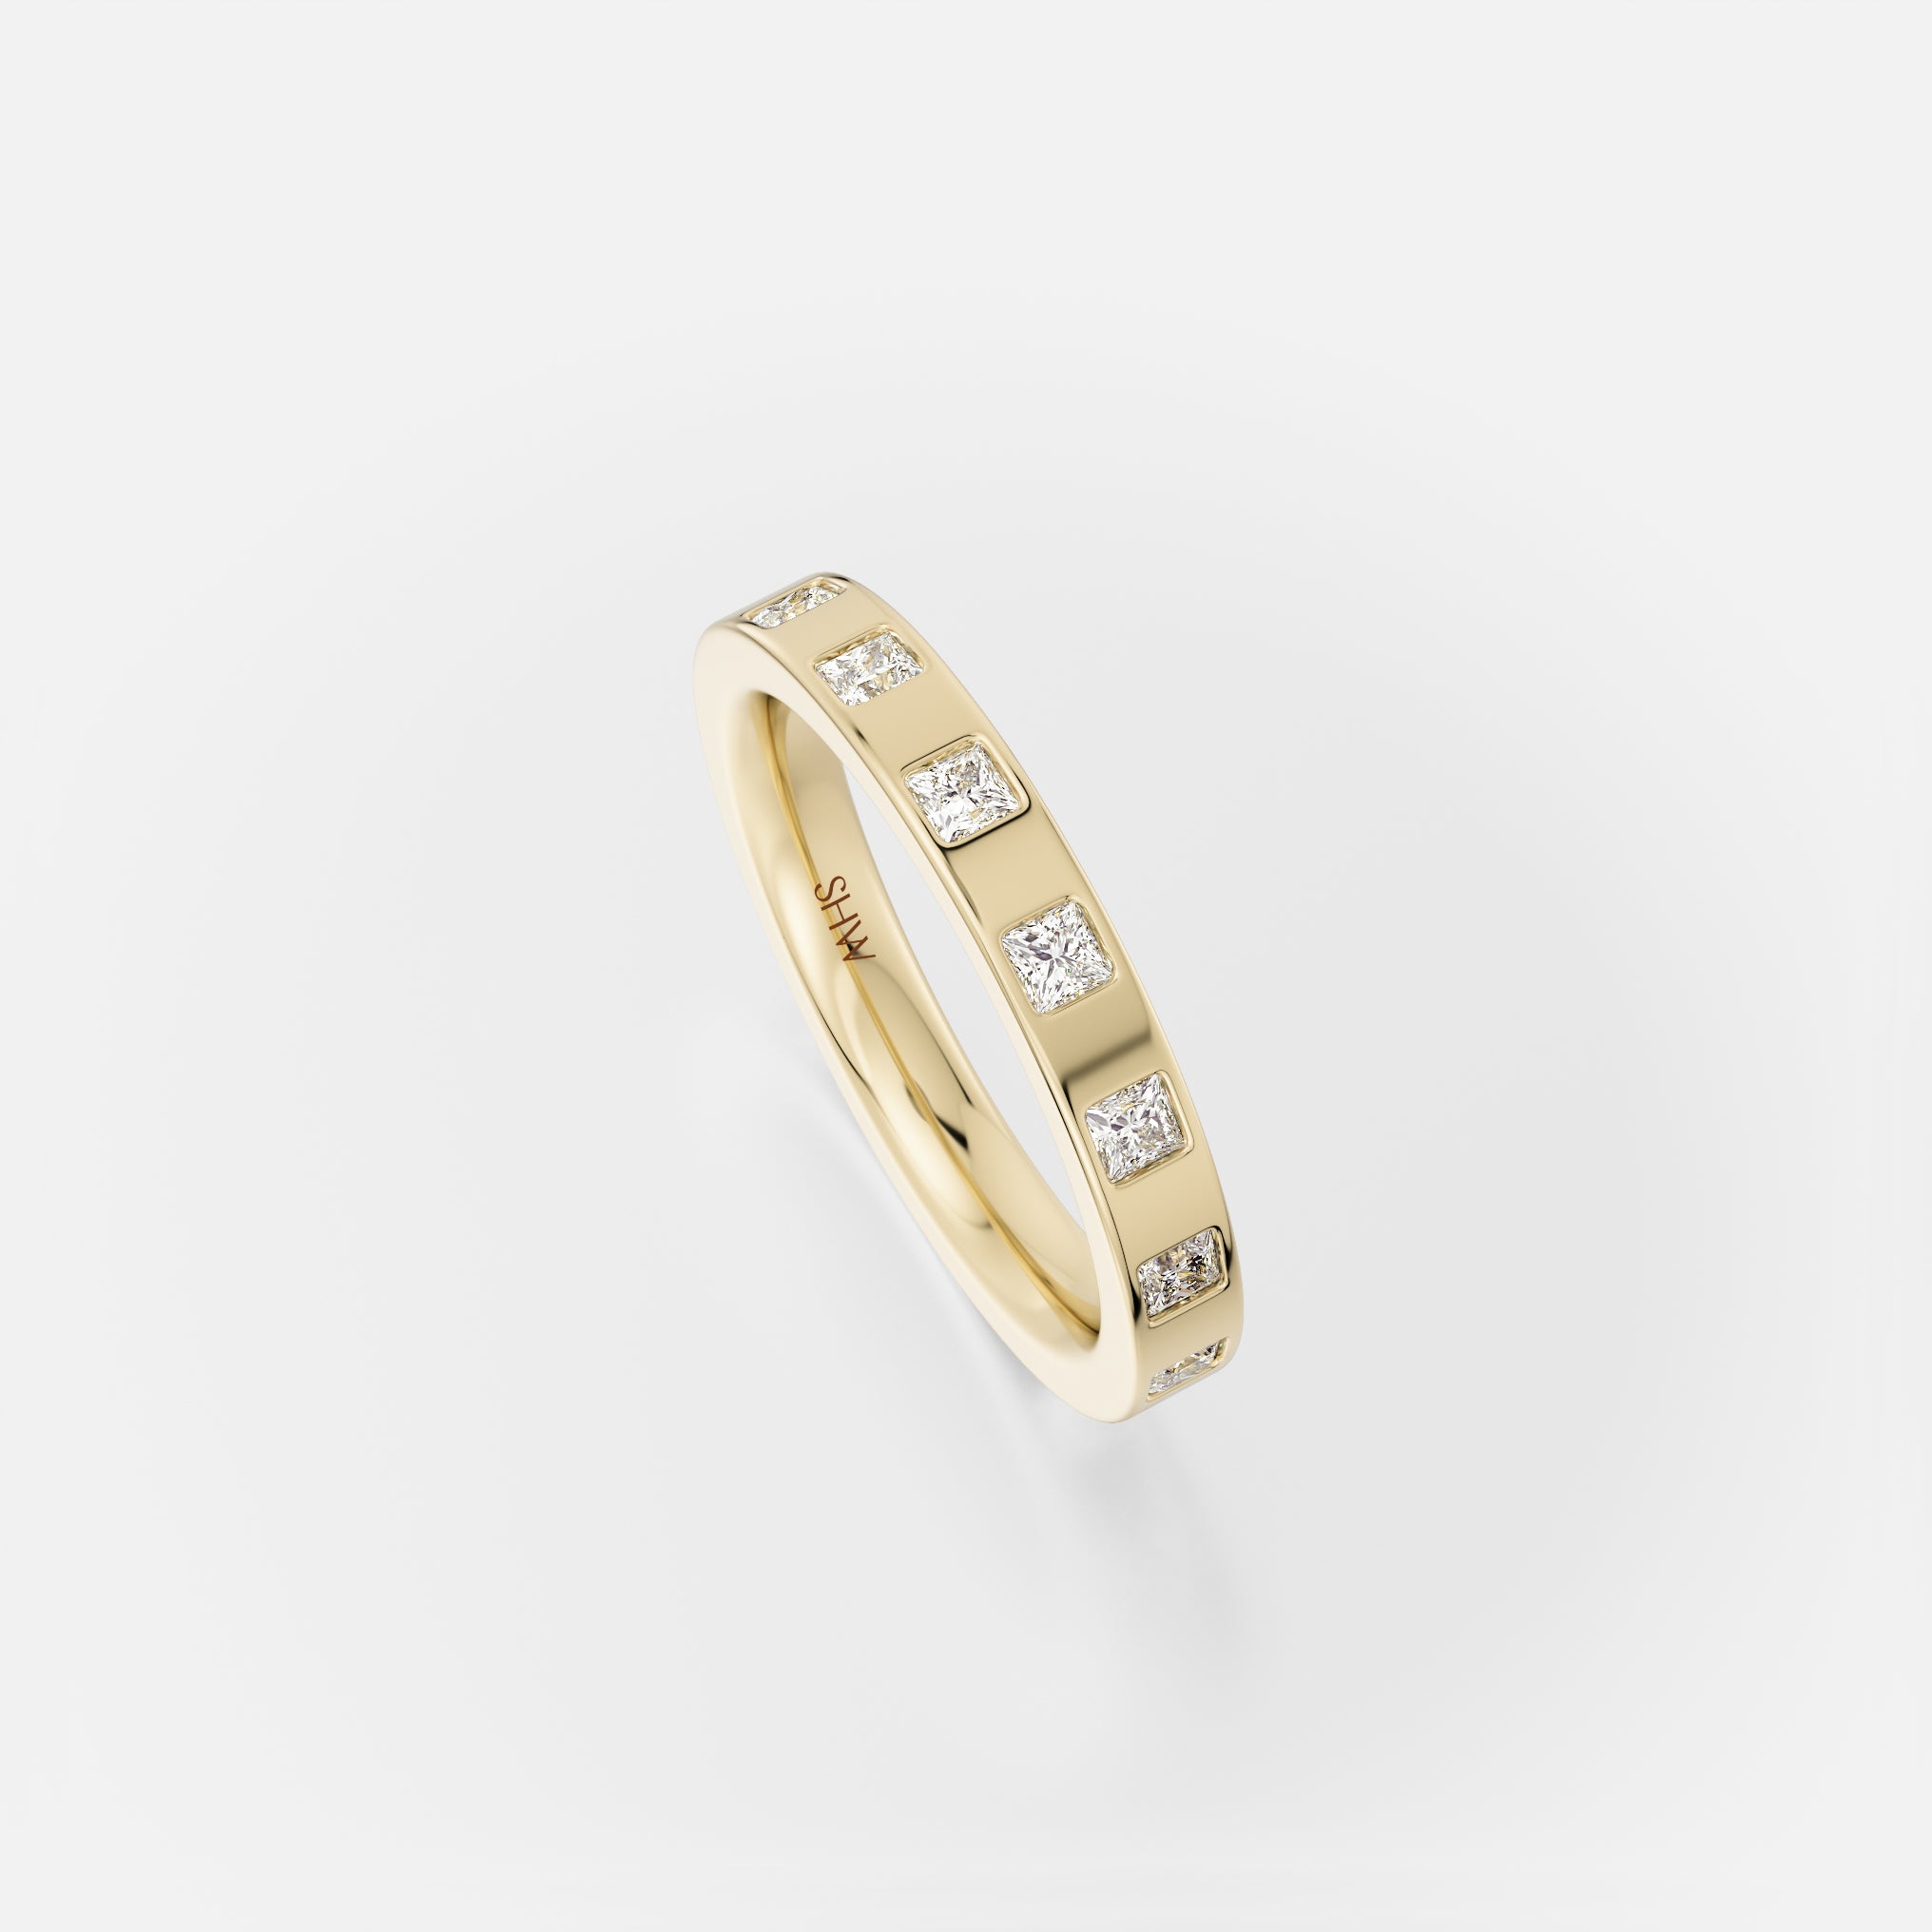 Handmade Lisa Ring with 14 karat yellow gold set with diamonds made in New York City by SHW fine Jewelry